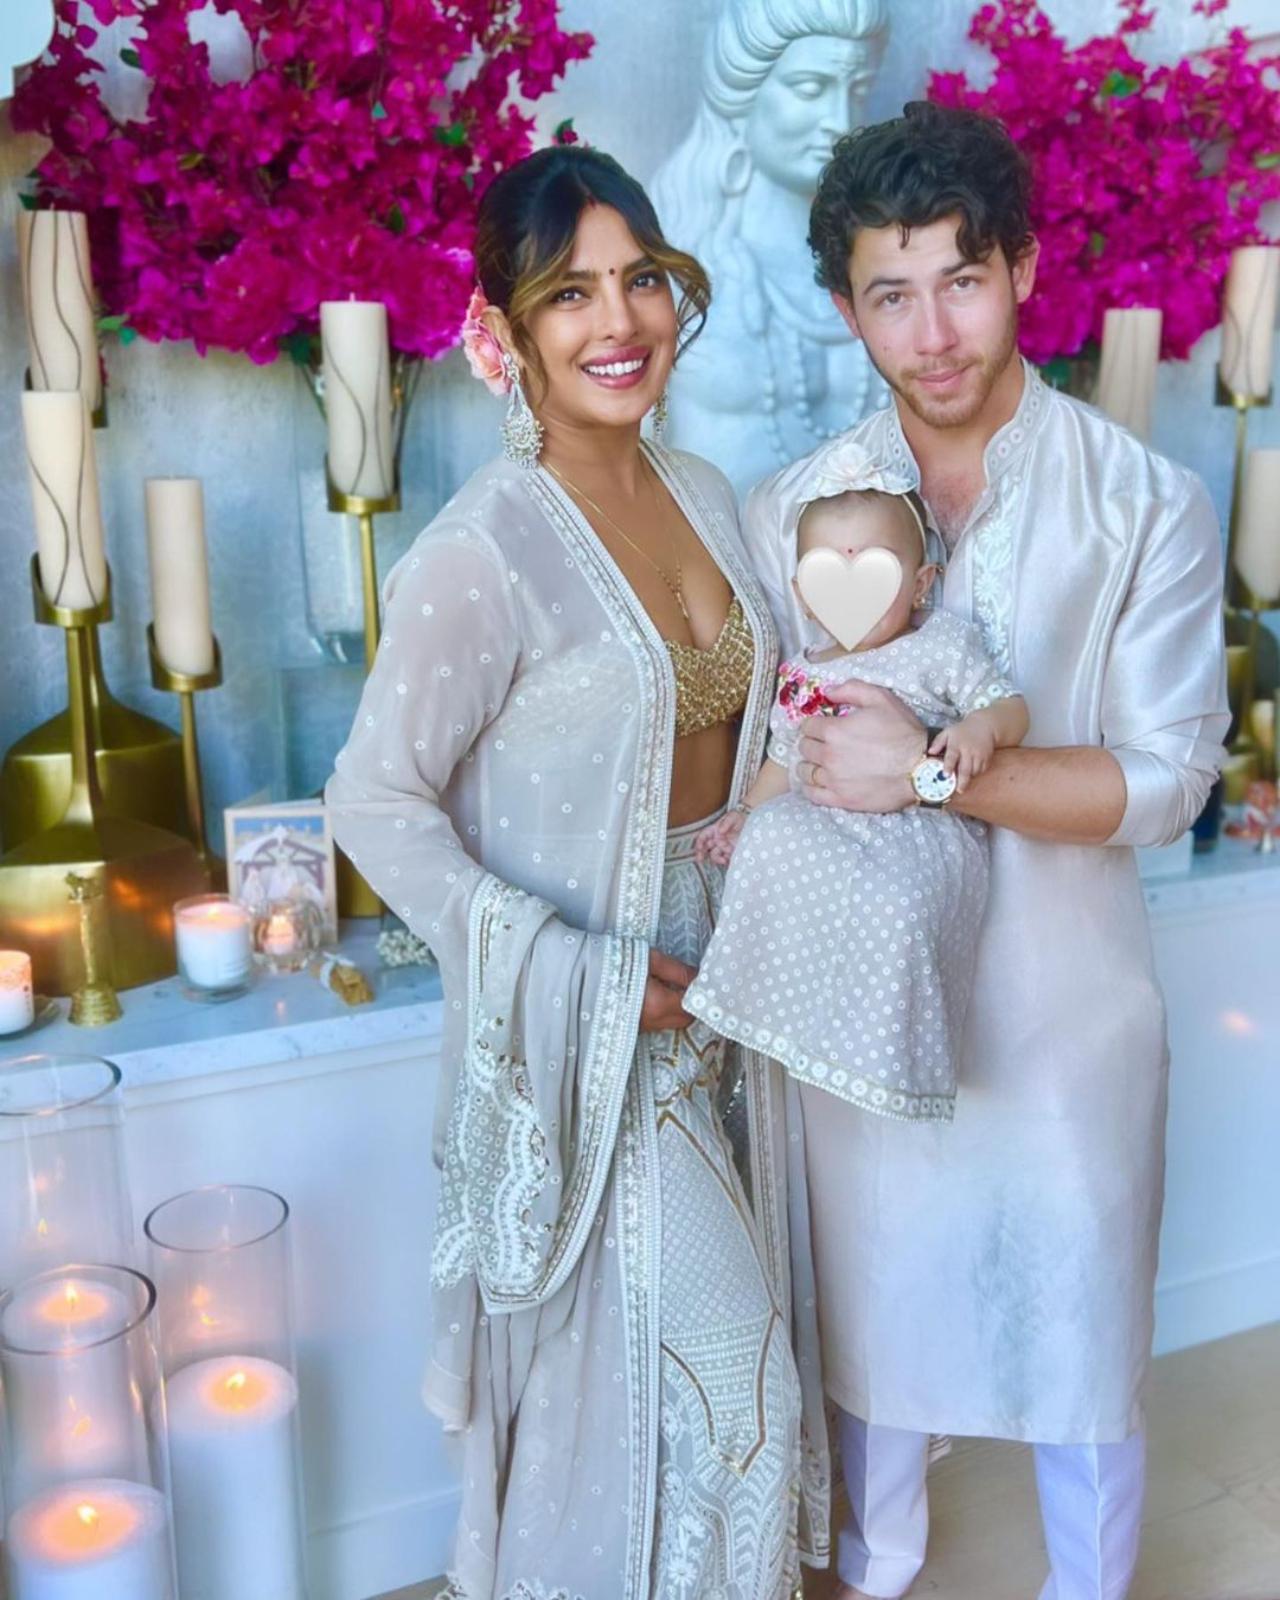 Priyanka and Nick got married in 2018 and welcomed their daughter in January this year via surrogacy